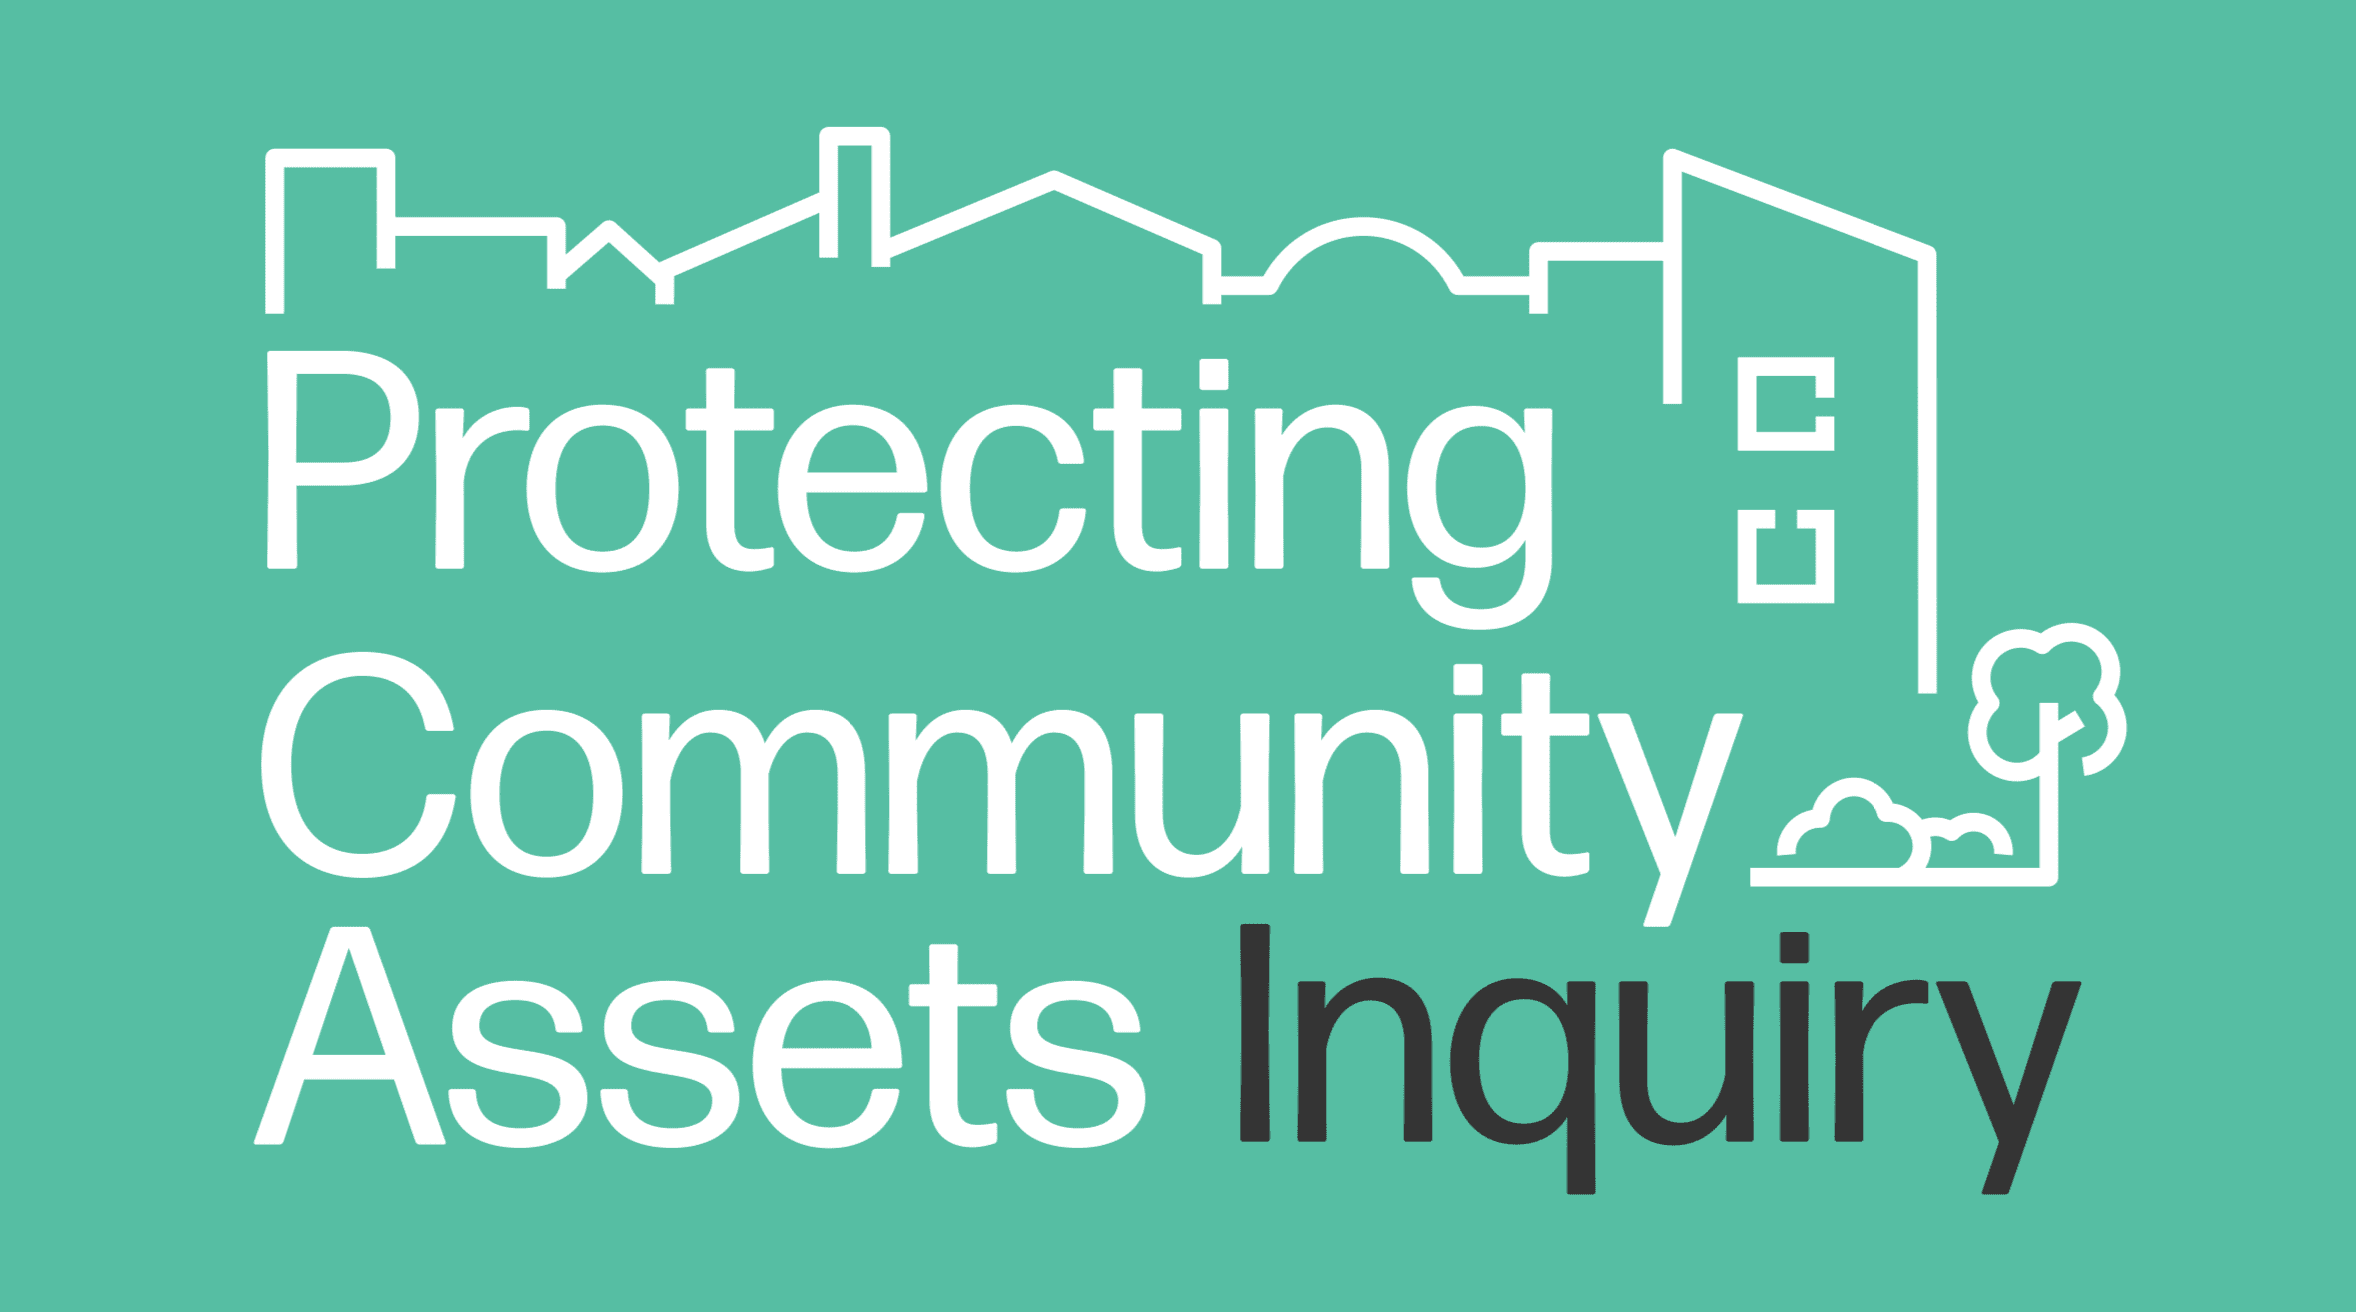 Inquiry seeks to protect a potential 1,300 community assets at risk of falling out of community hands